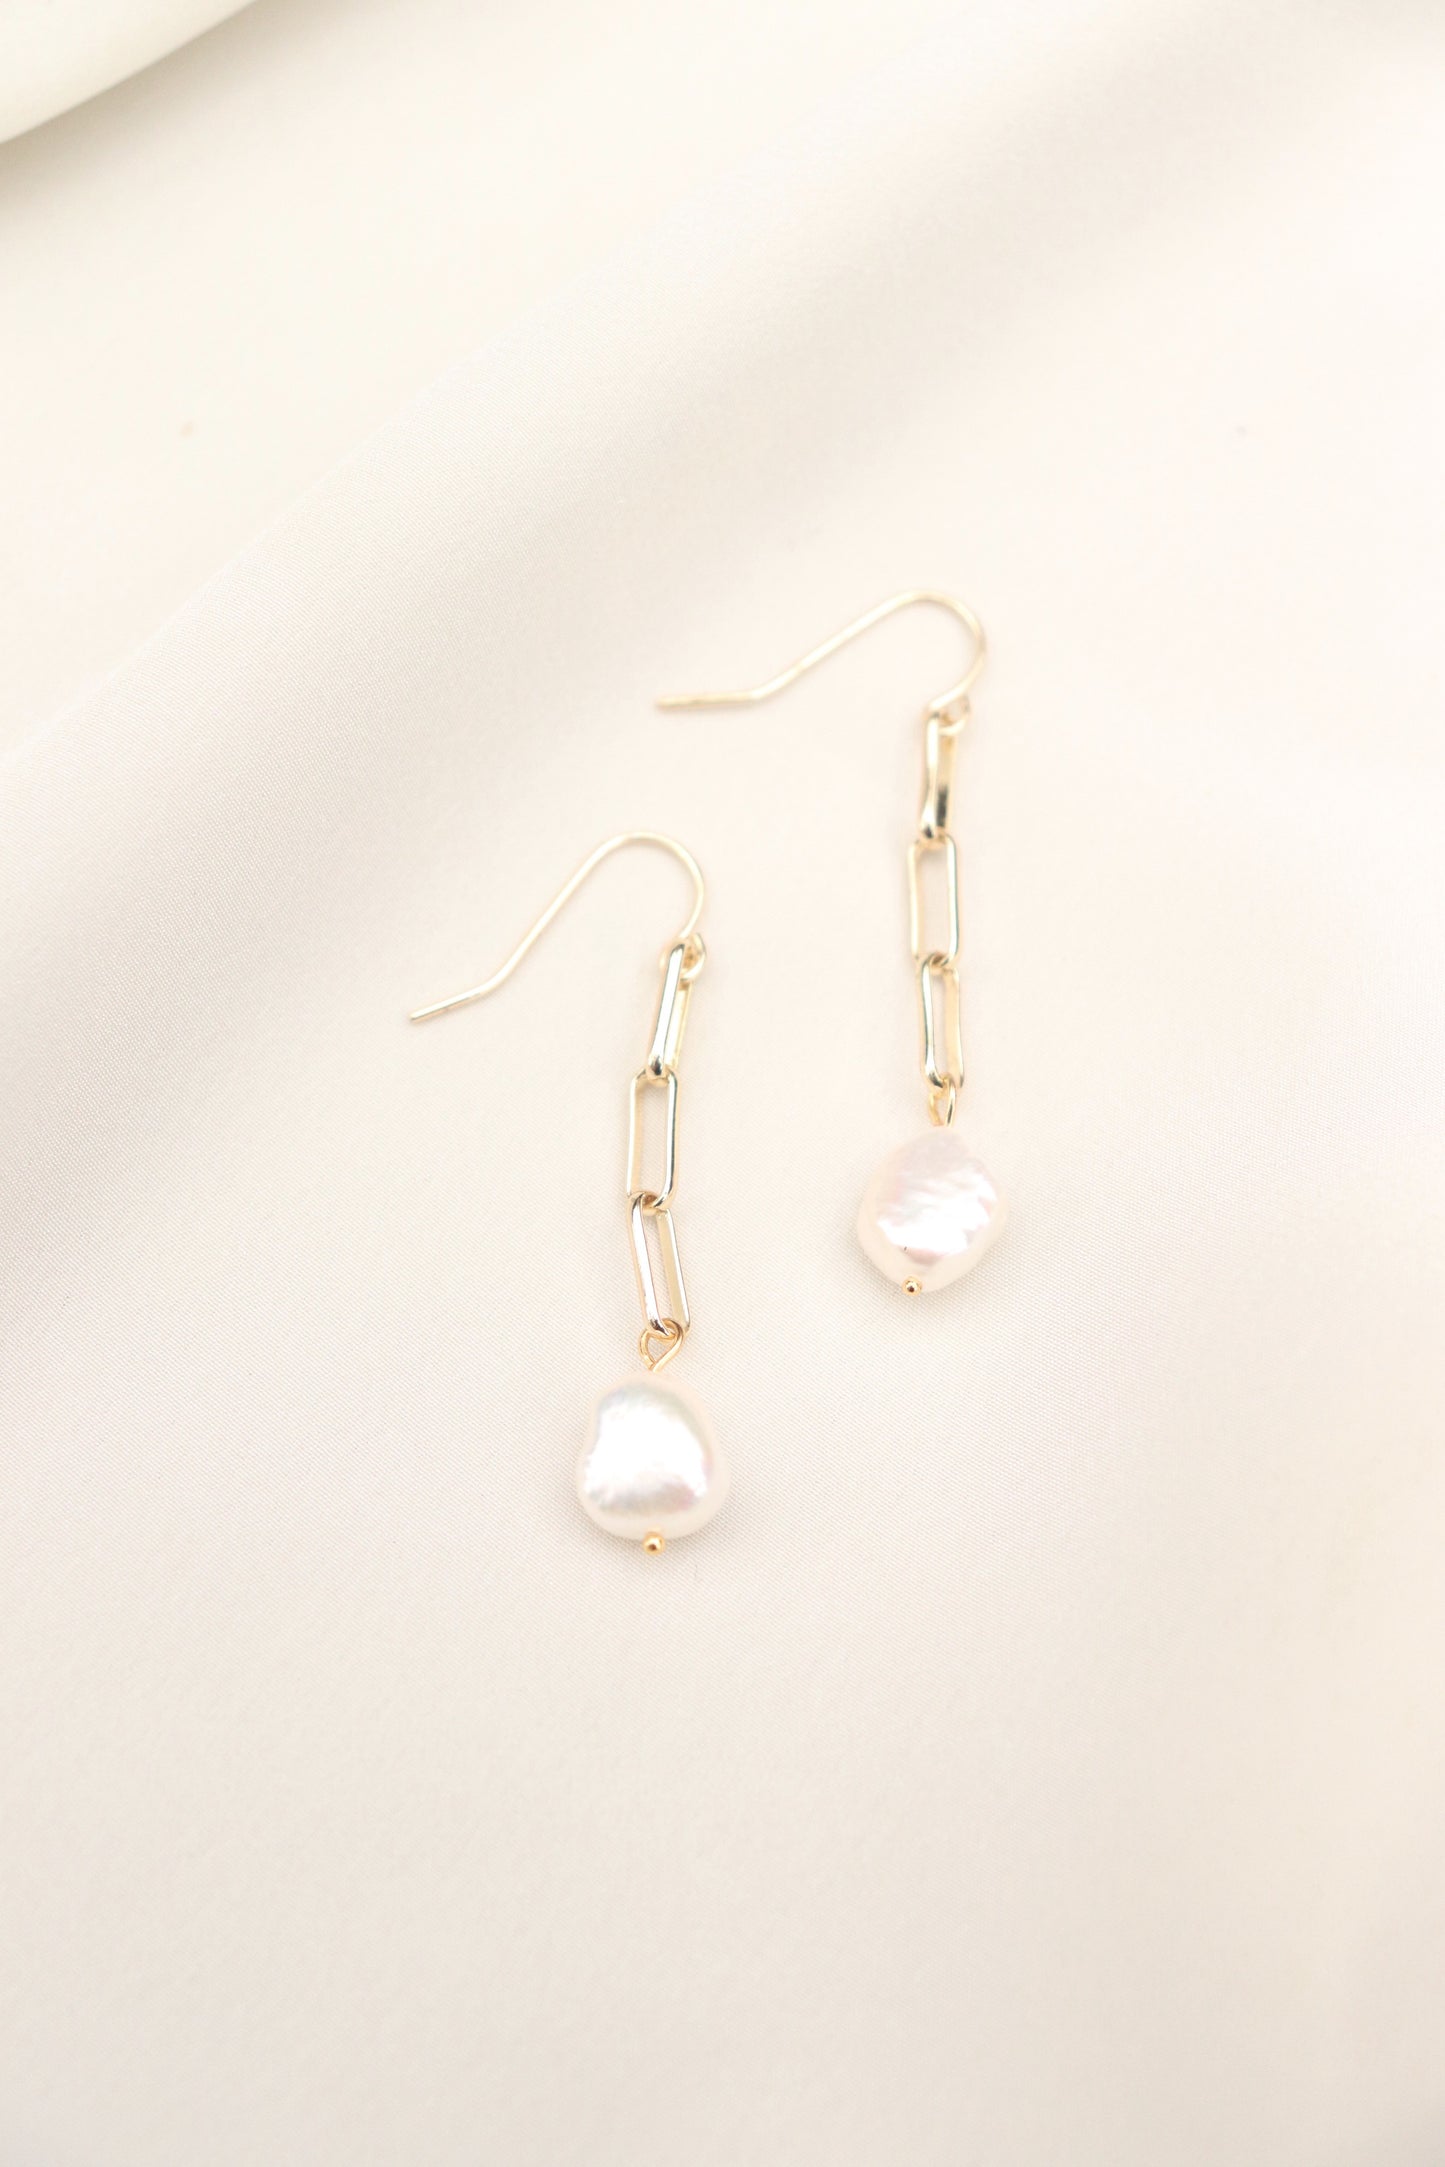 Paperclip and Pearl Earrings